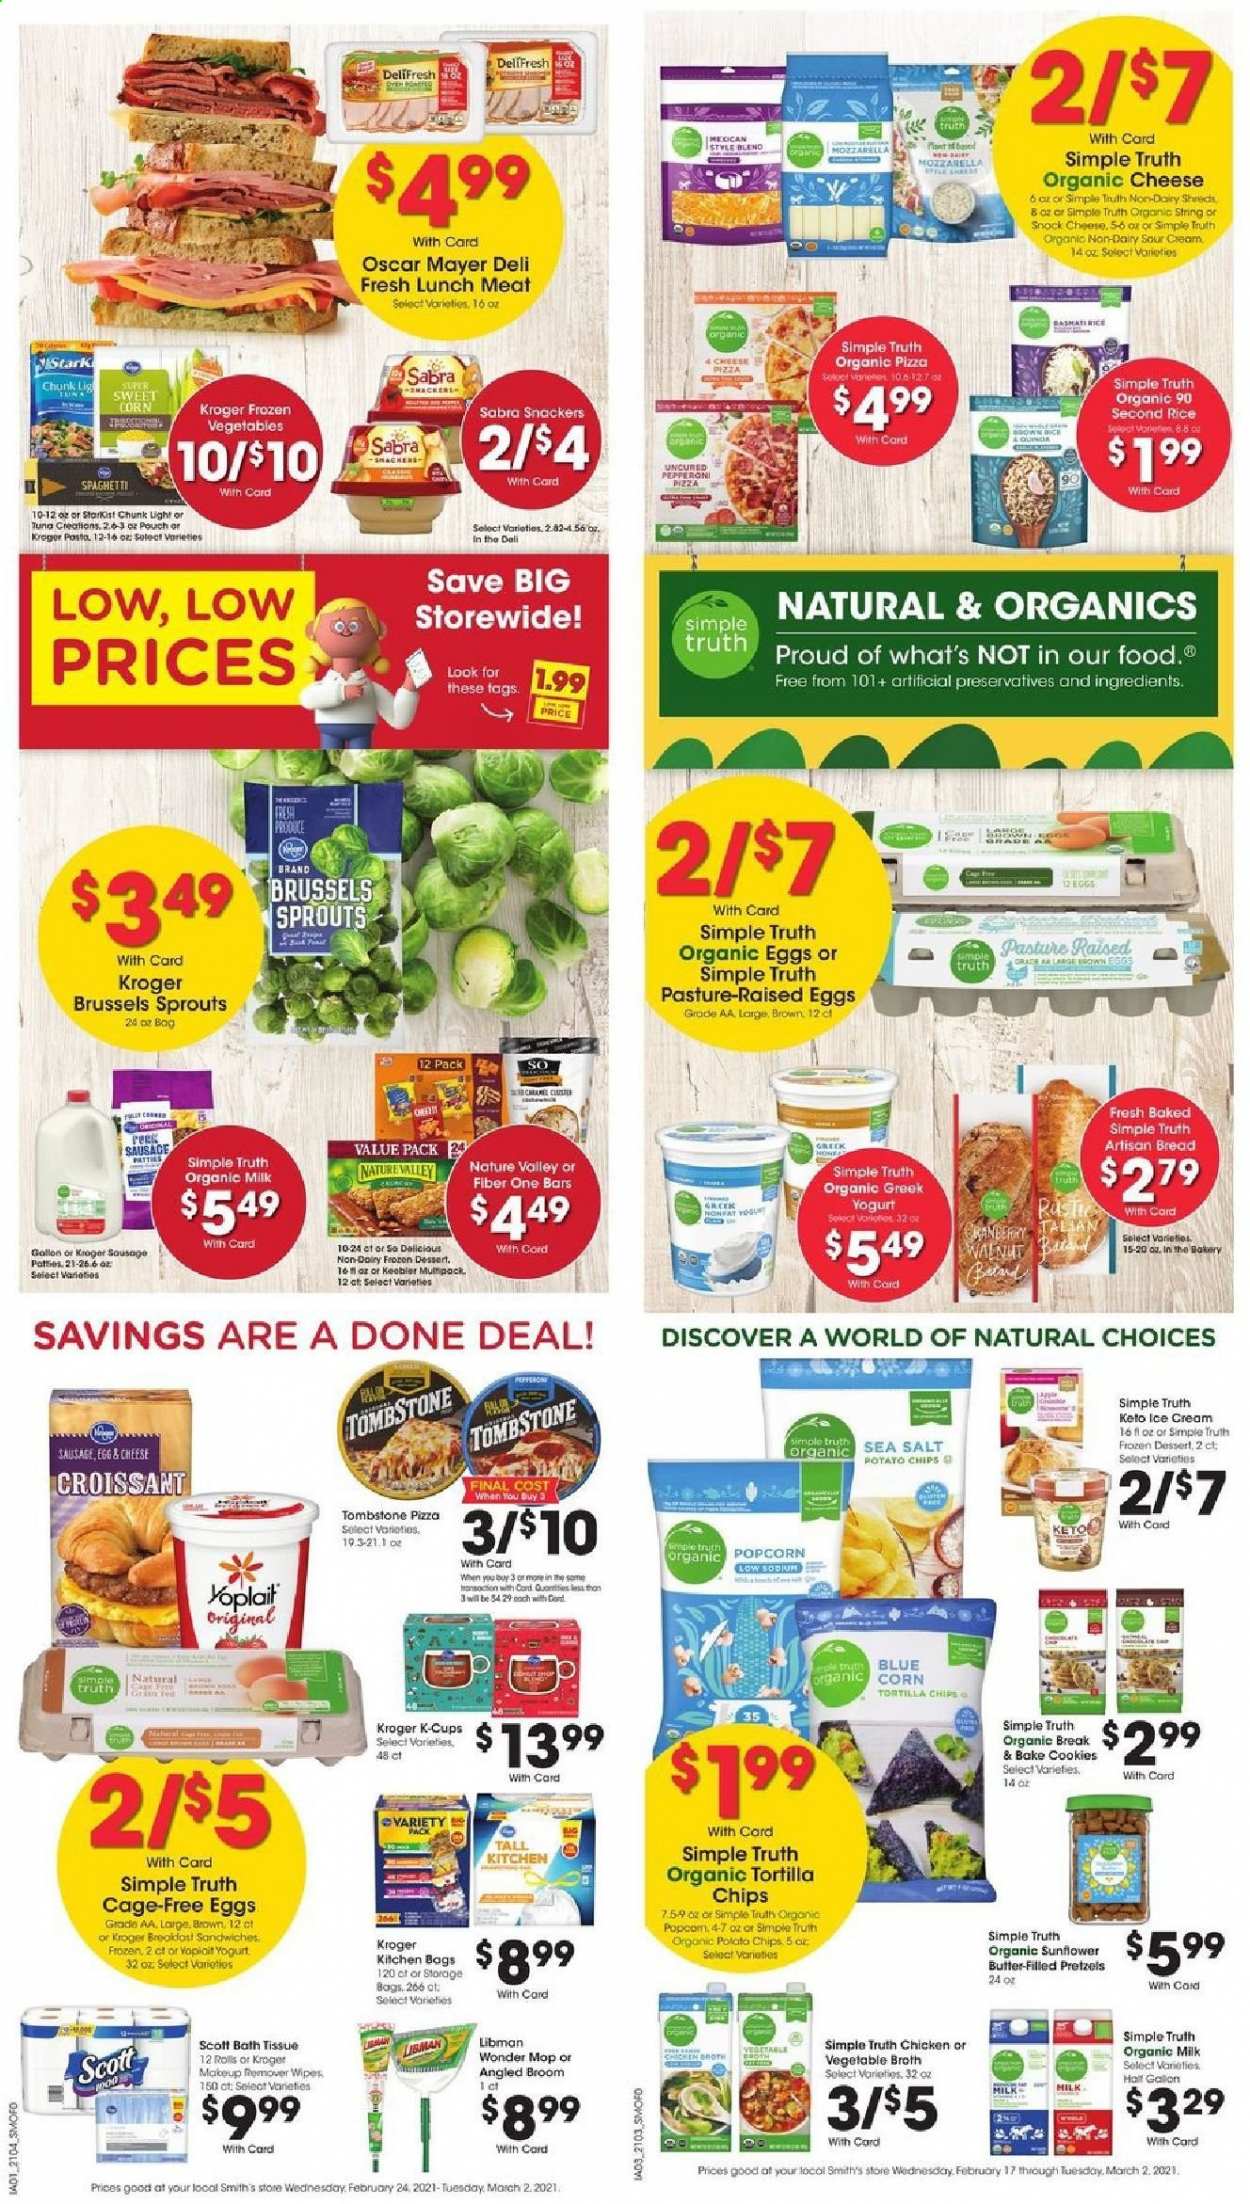 thumbnail - Smith's Flyer - 02/24/2021 - 03/02/2021 - Sales products - bread, pretzels, croissant, tuna, pizza, Oscar Mayer, sausage, lunch meat, mozzarella, greek yoghurt, yoghurt, Yoplait, organic milk, eggs, butter, sour cream, ice cream, corn, frozen vegetables, brussel sprouts, sweet corn, cookies, tortilla chips, potato chips, Smith's, popcorn, sea salt, broth, Nature Valley, Fiber One, basmati rice, rice, spaghetti, pasta, walnuts, coffee capsules, K-Cups, bath tissue, wipes, makeup, makeup remover, storage bag, mop, broom. Page 6.